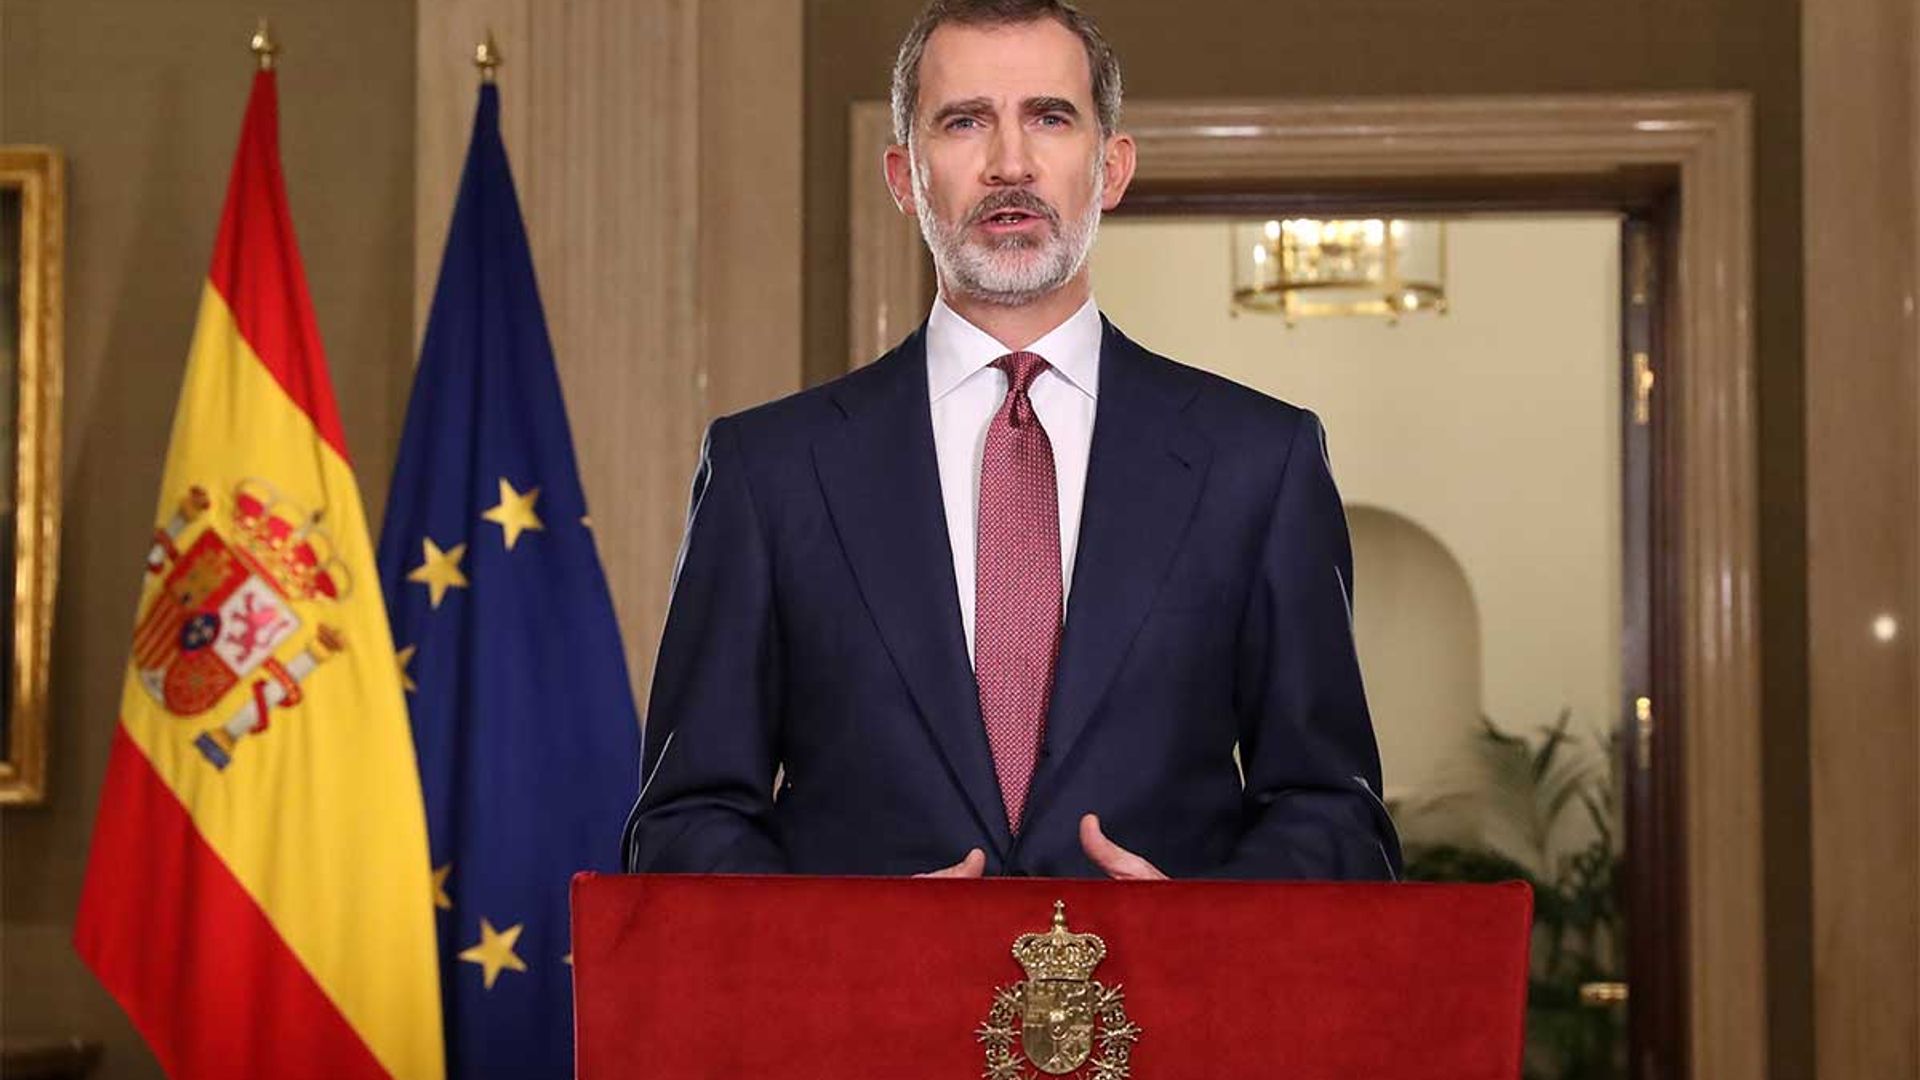 King Felipe of Spain urges nation to stay strong and expresses sympathy during coronavirus crisis